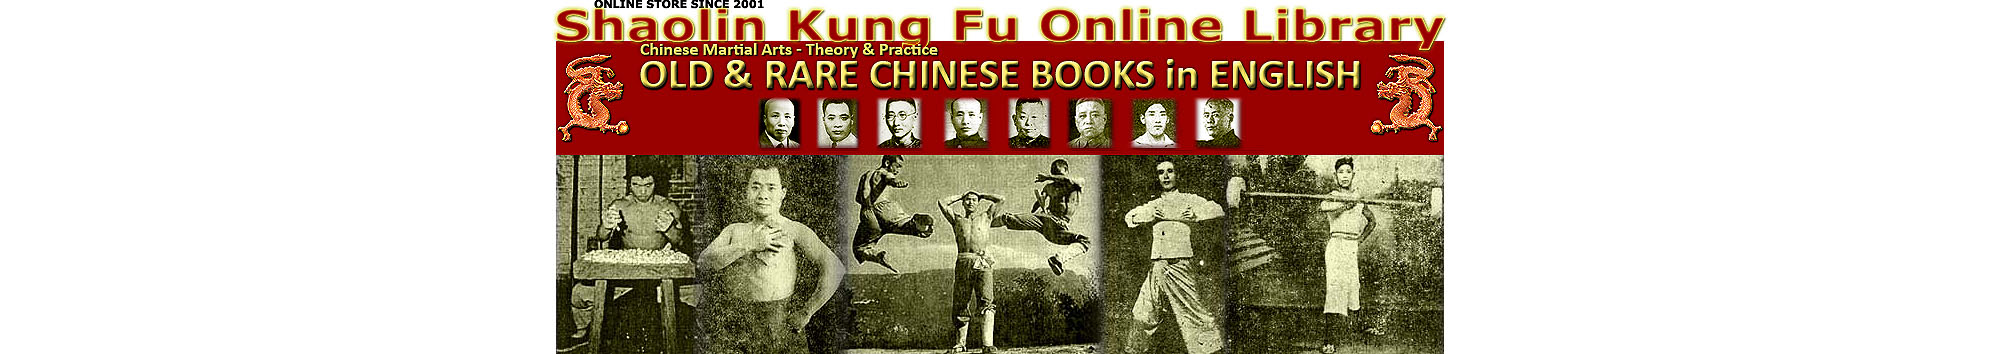 SHAOLIN KUNG FU ONLINE LIBRARY BOOKSTORE - OLD & RARE CHINESE MARTIAL ARTS BOOKS